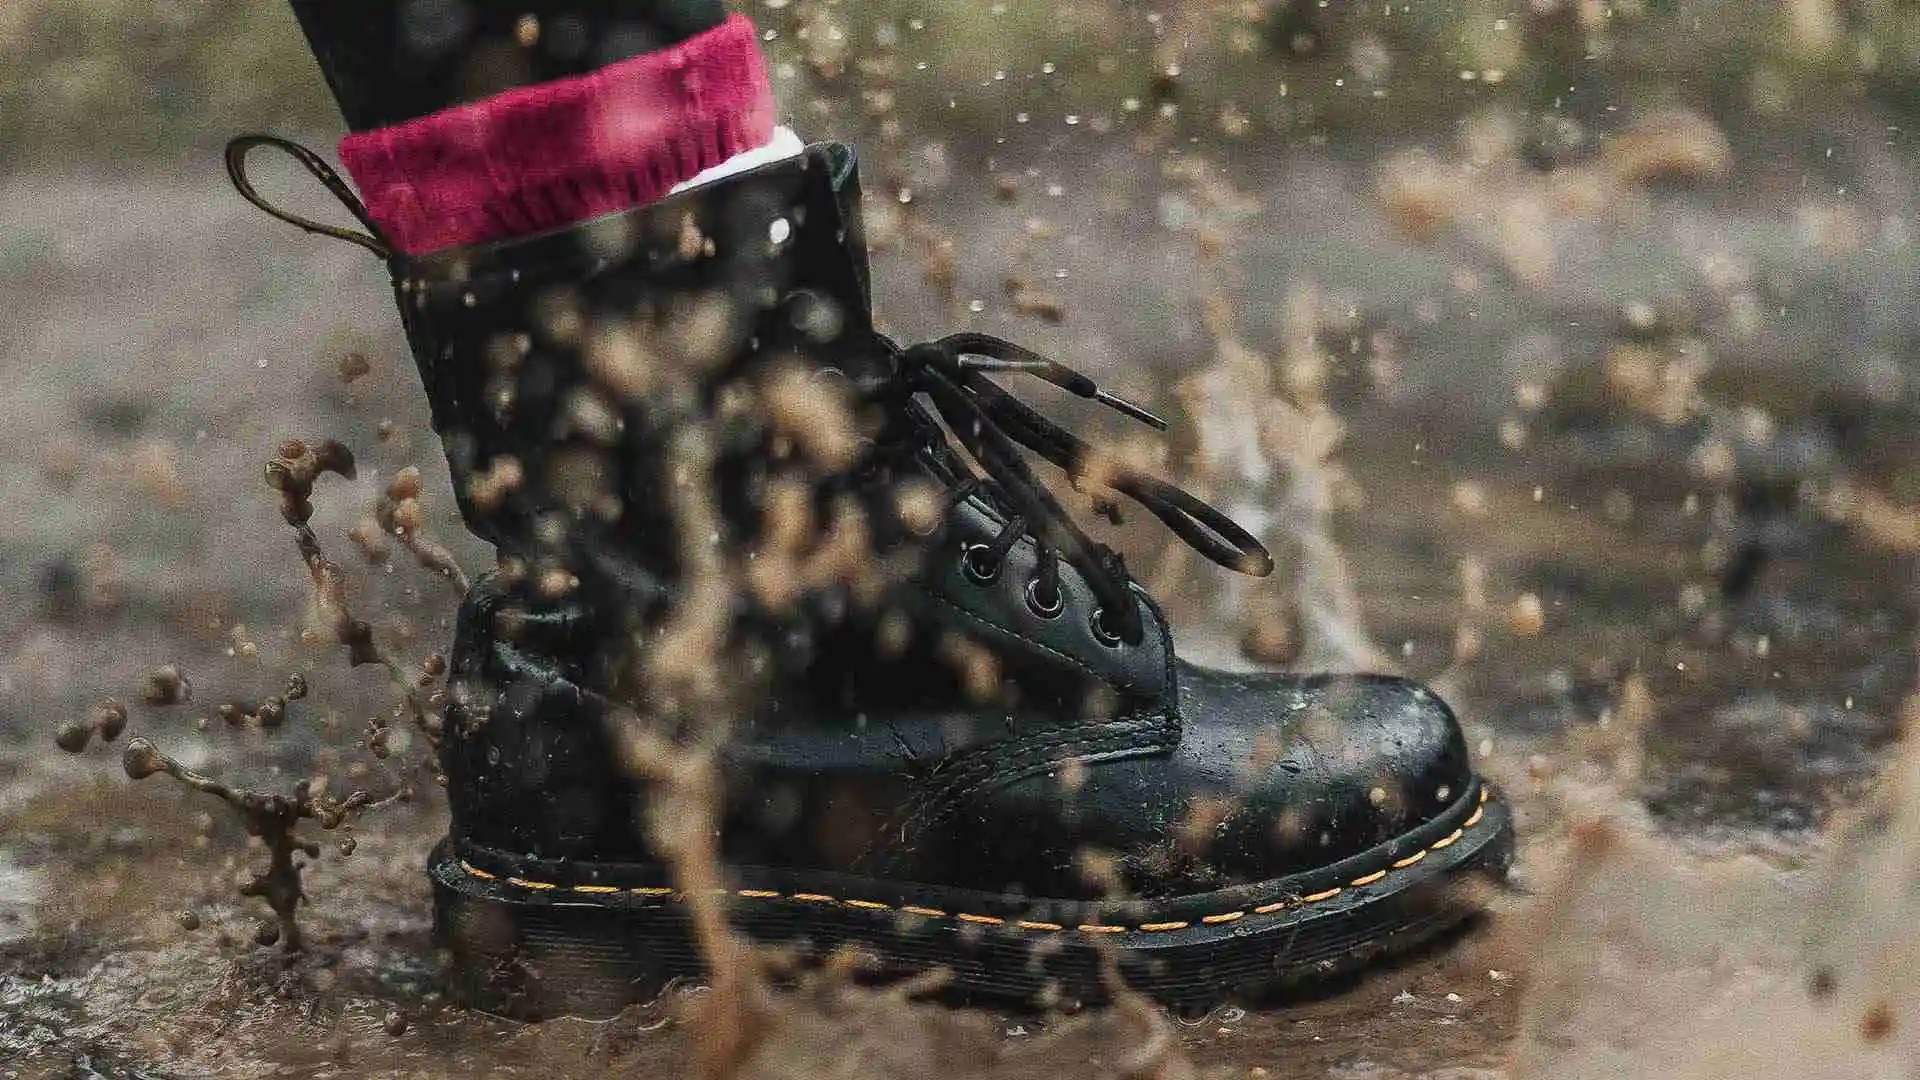 Black boot stepping in muddy puddle and splashing